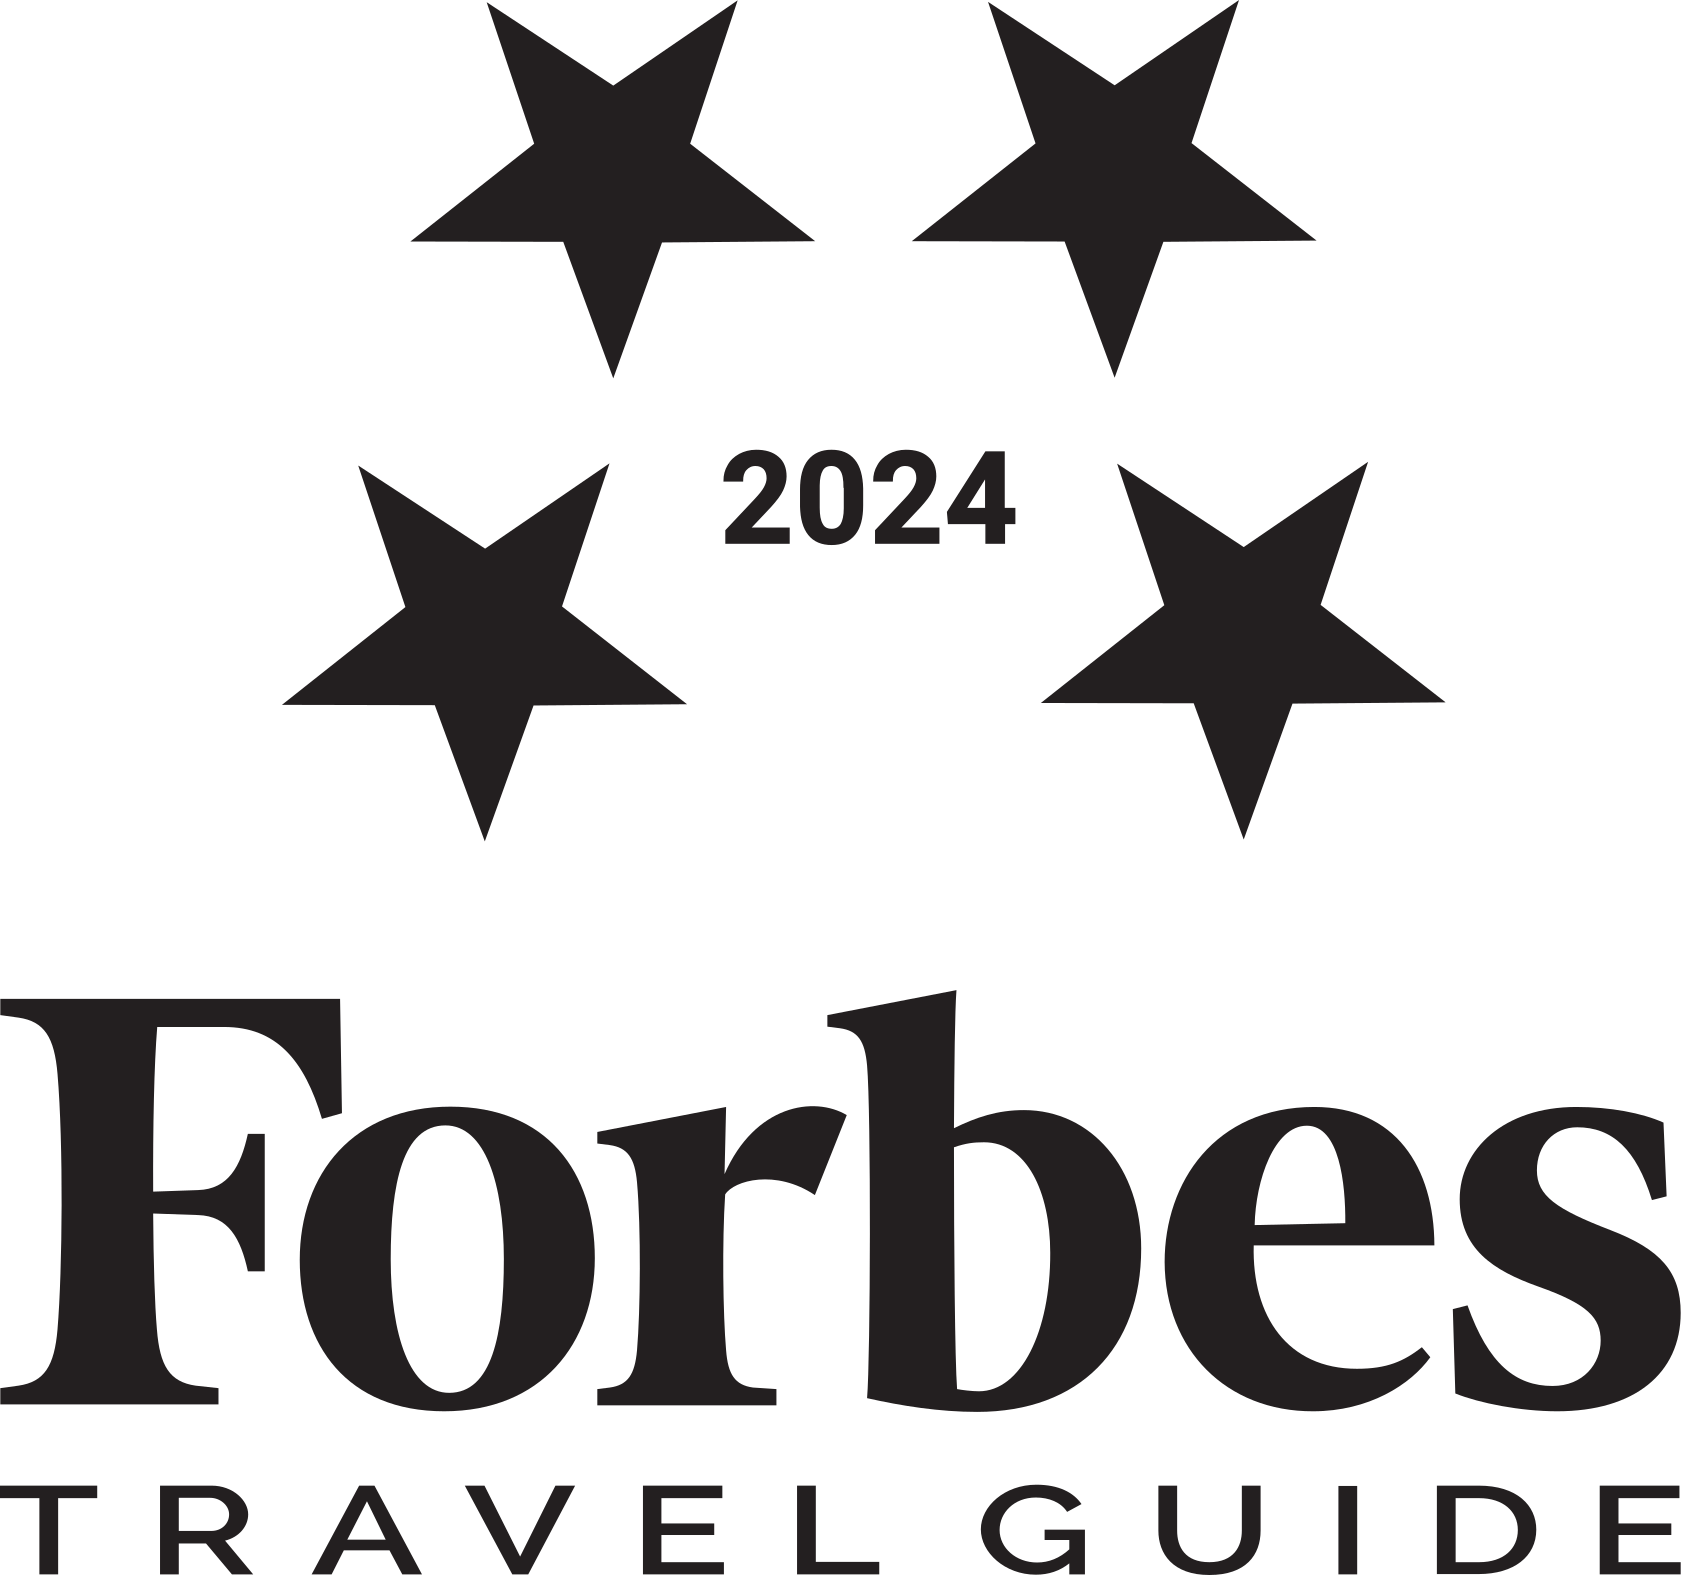 Awards Forbes